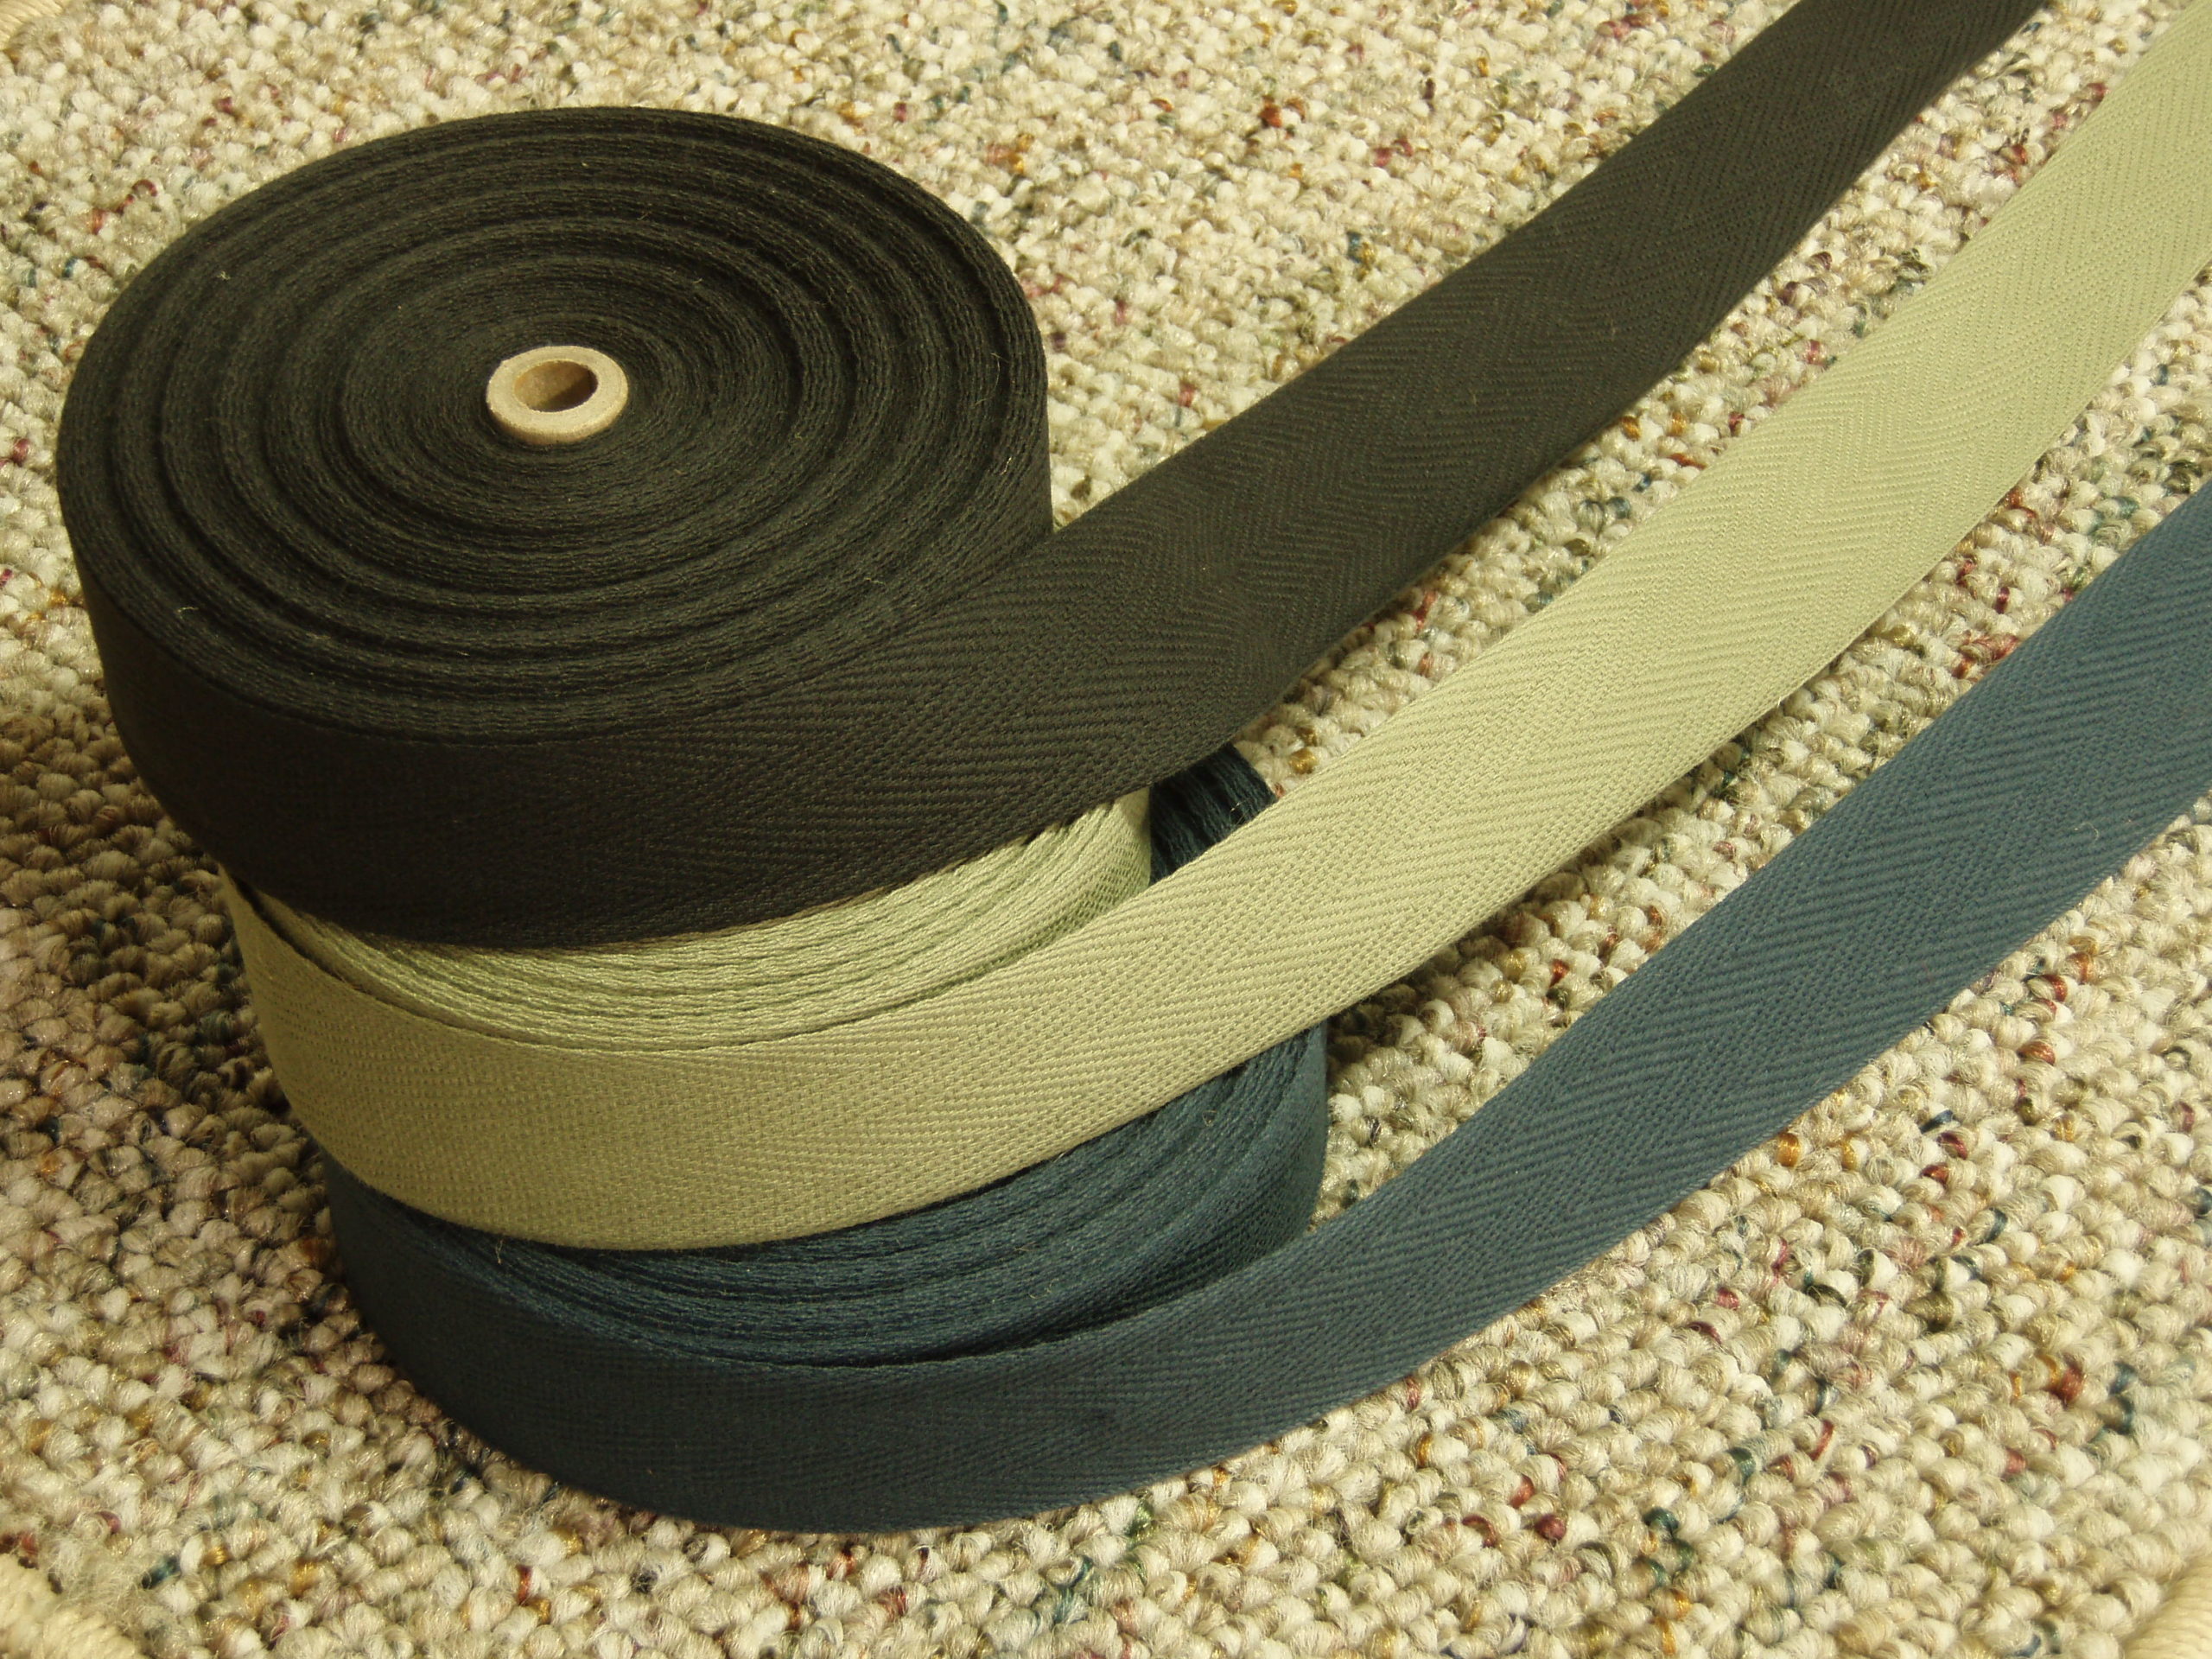 What Is Carpet Binding Tape? - Bond Products Inc